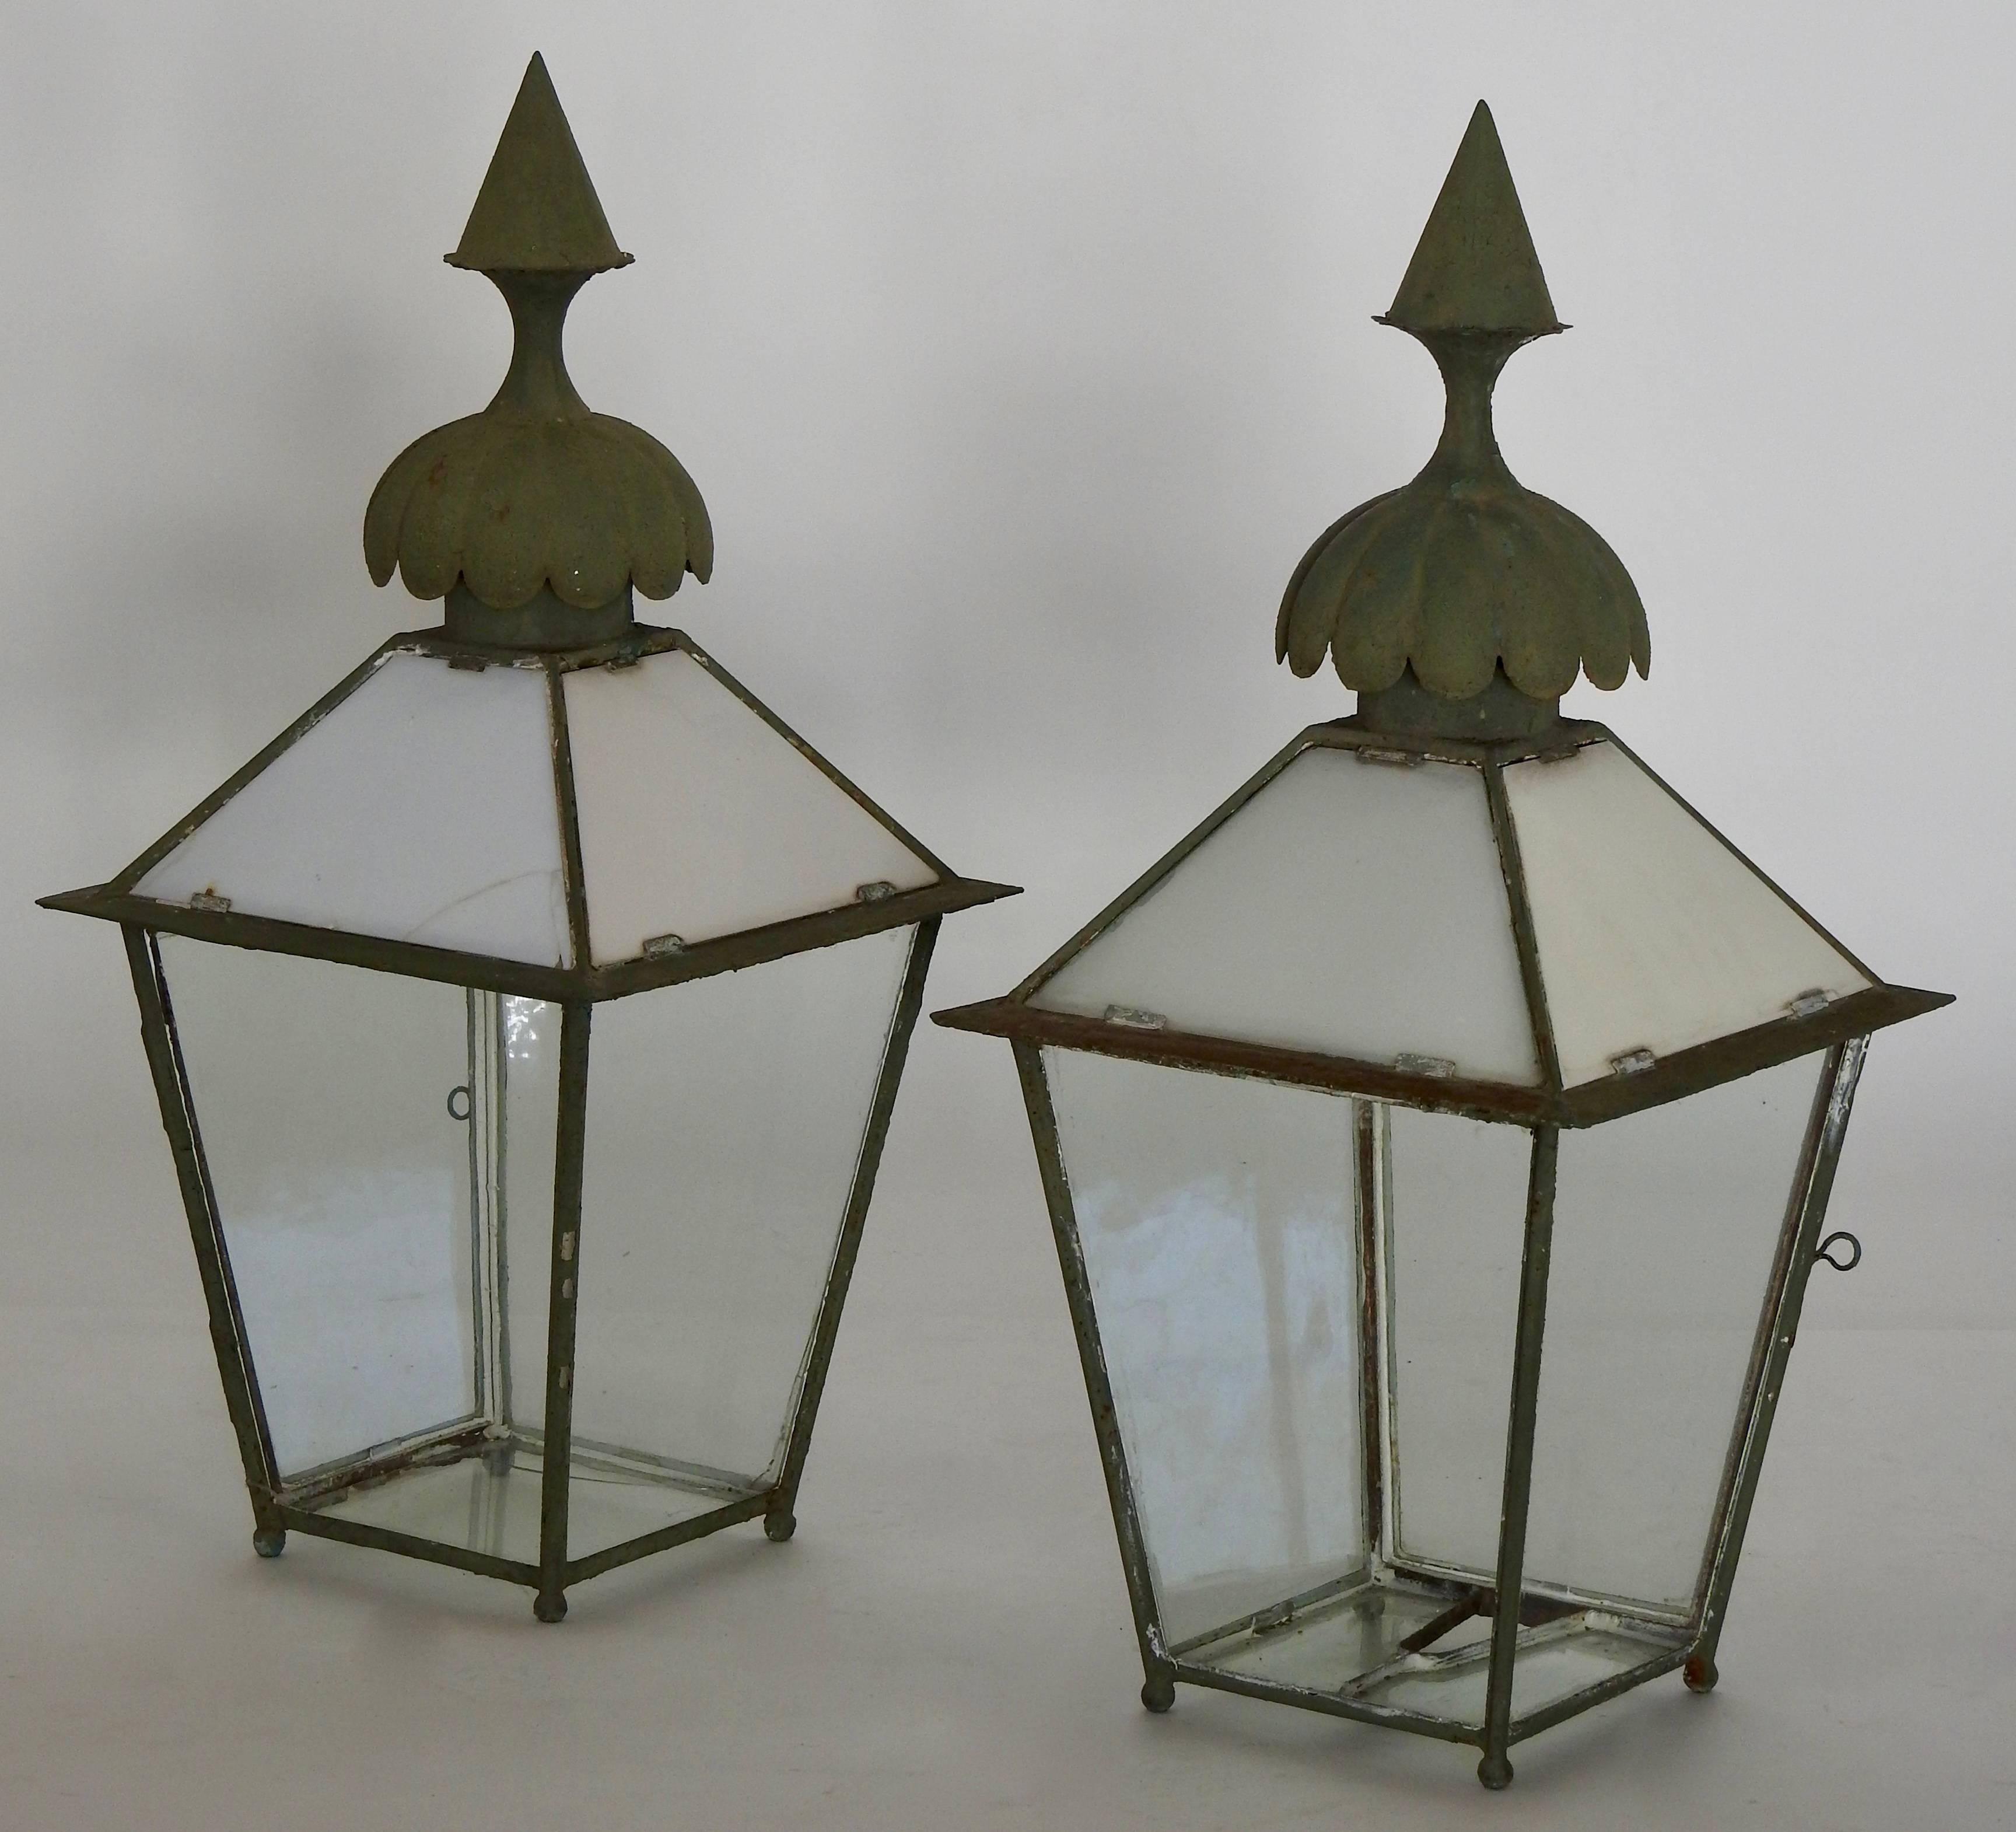 We are offering a set of two Gasolier lanterns from the 1880's. They are made of steel with glass. Superb finials on the top of each. Features cut clear glass and milk glass. Each closes with a hook and pin like mechanism. These were wired to be